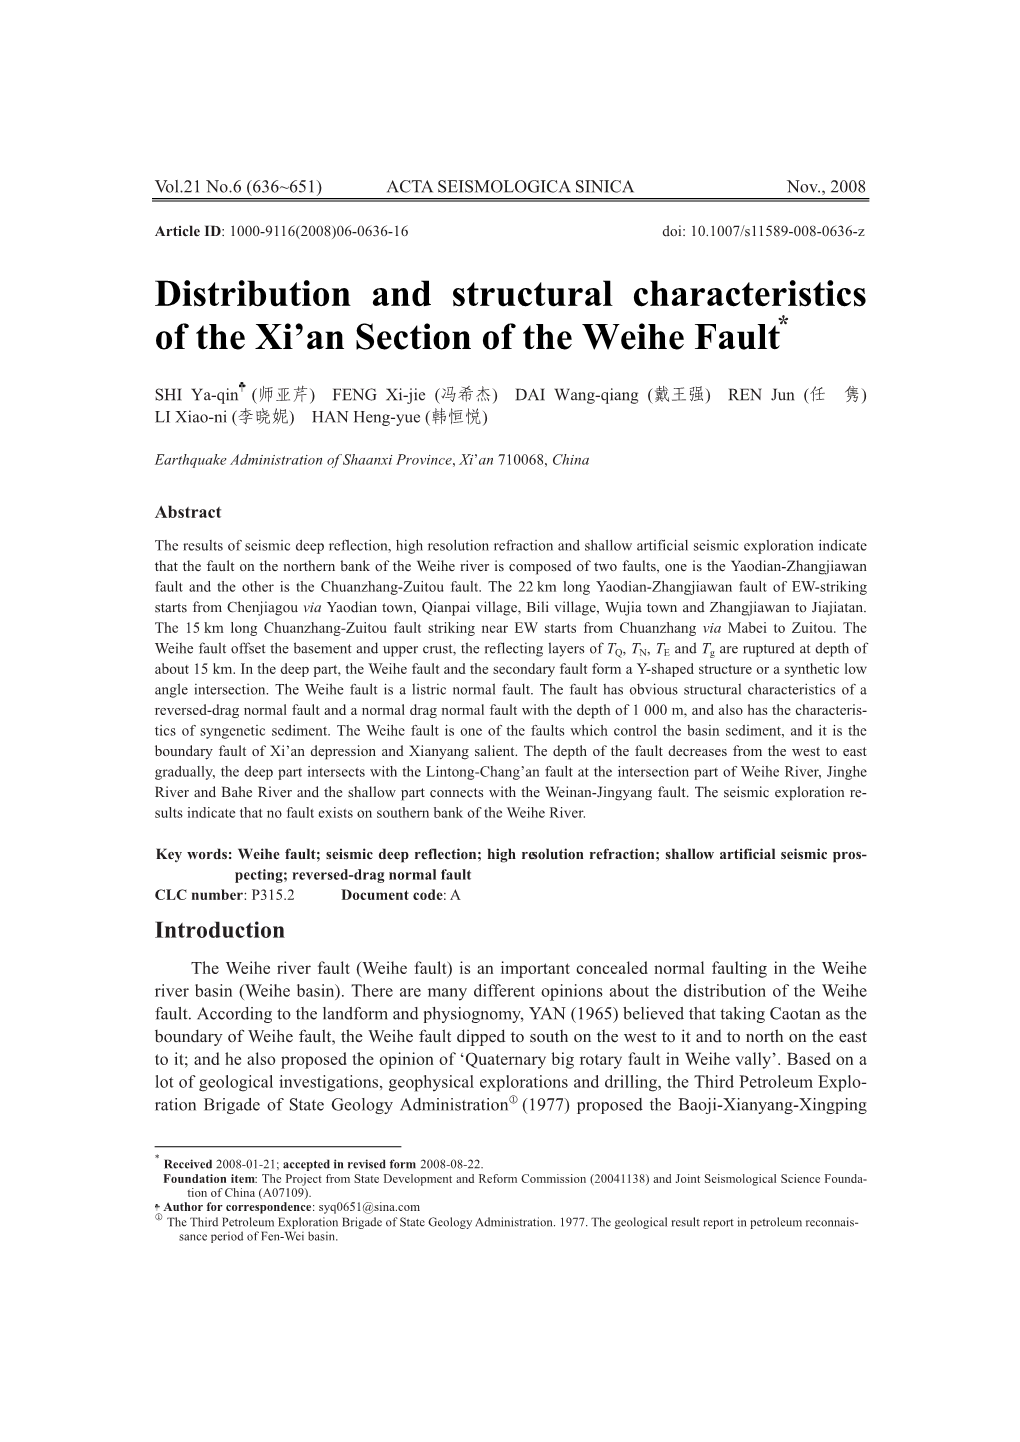 Distribution and Structural Characteristics of the Xi'an Section